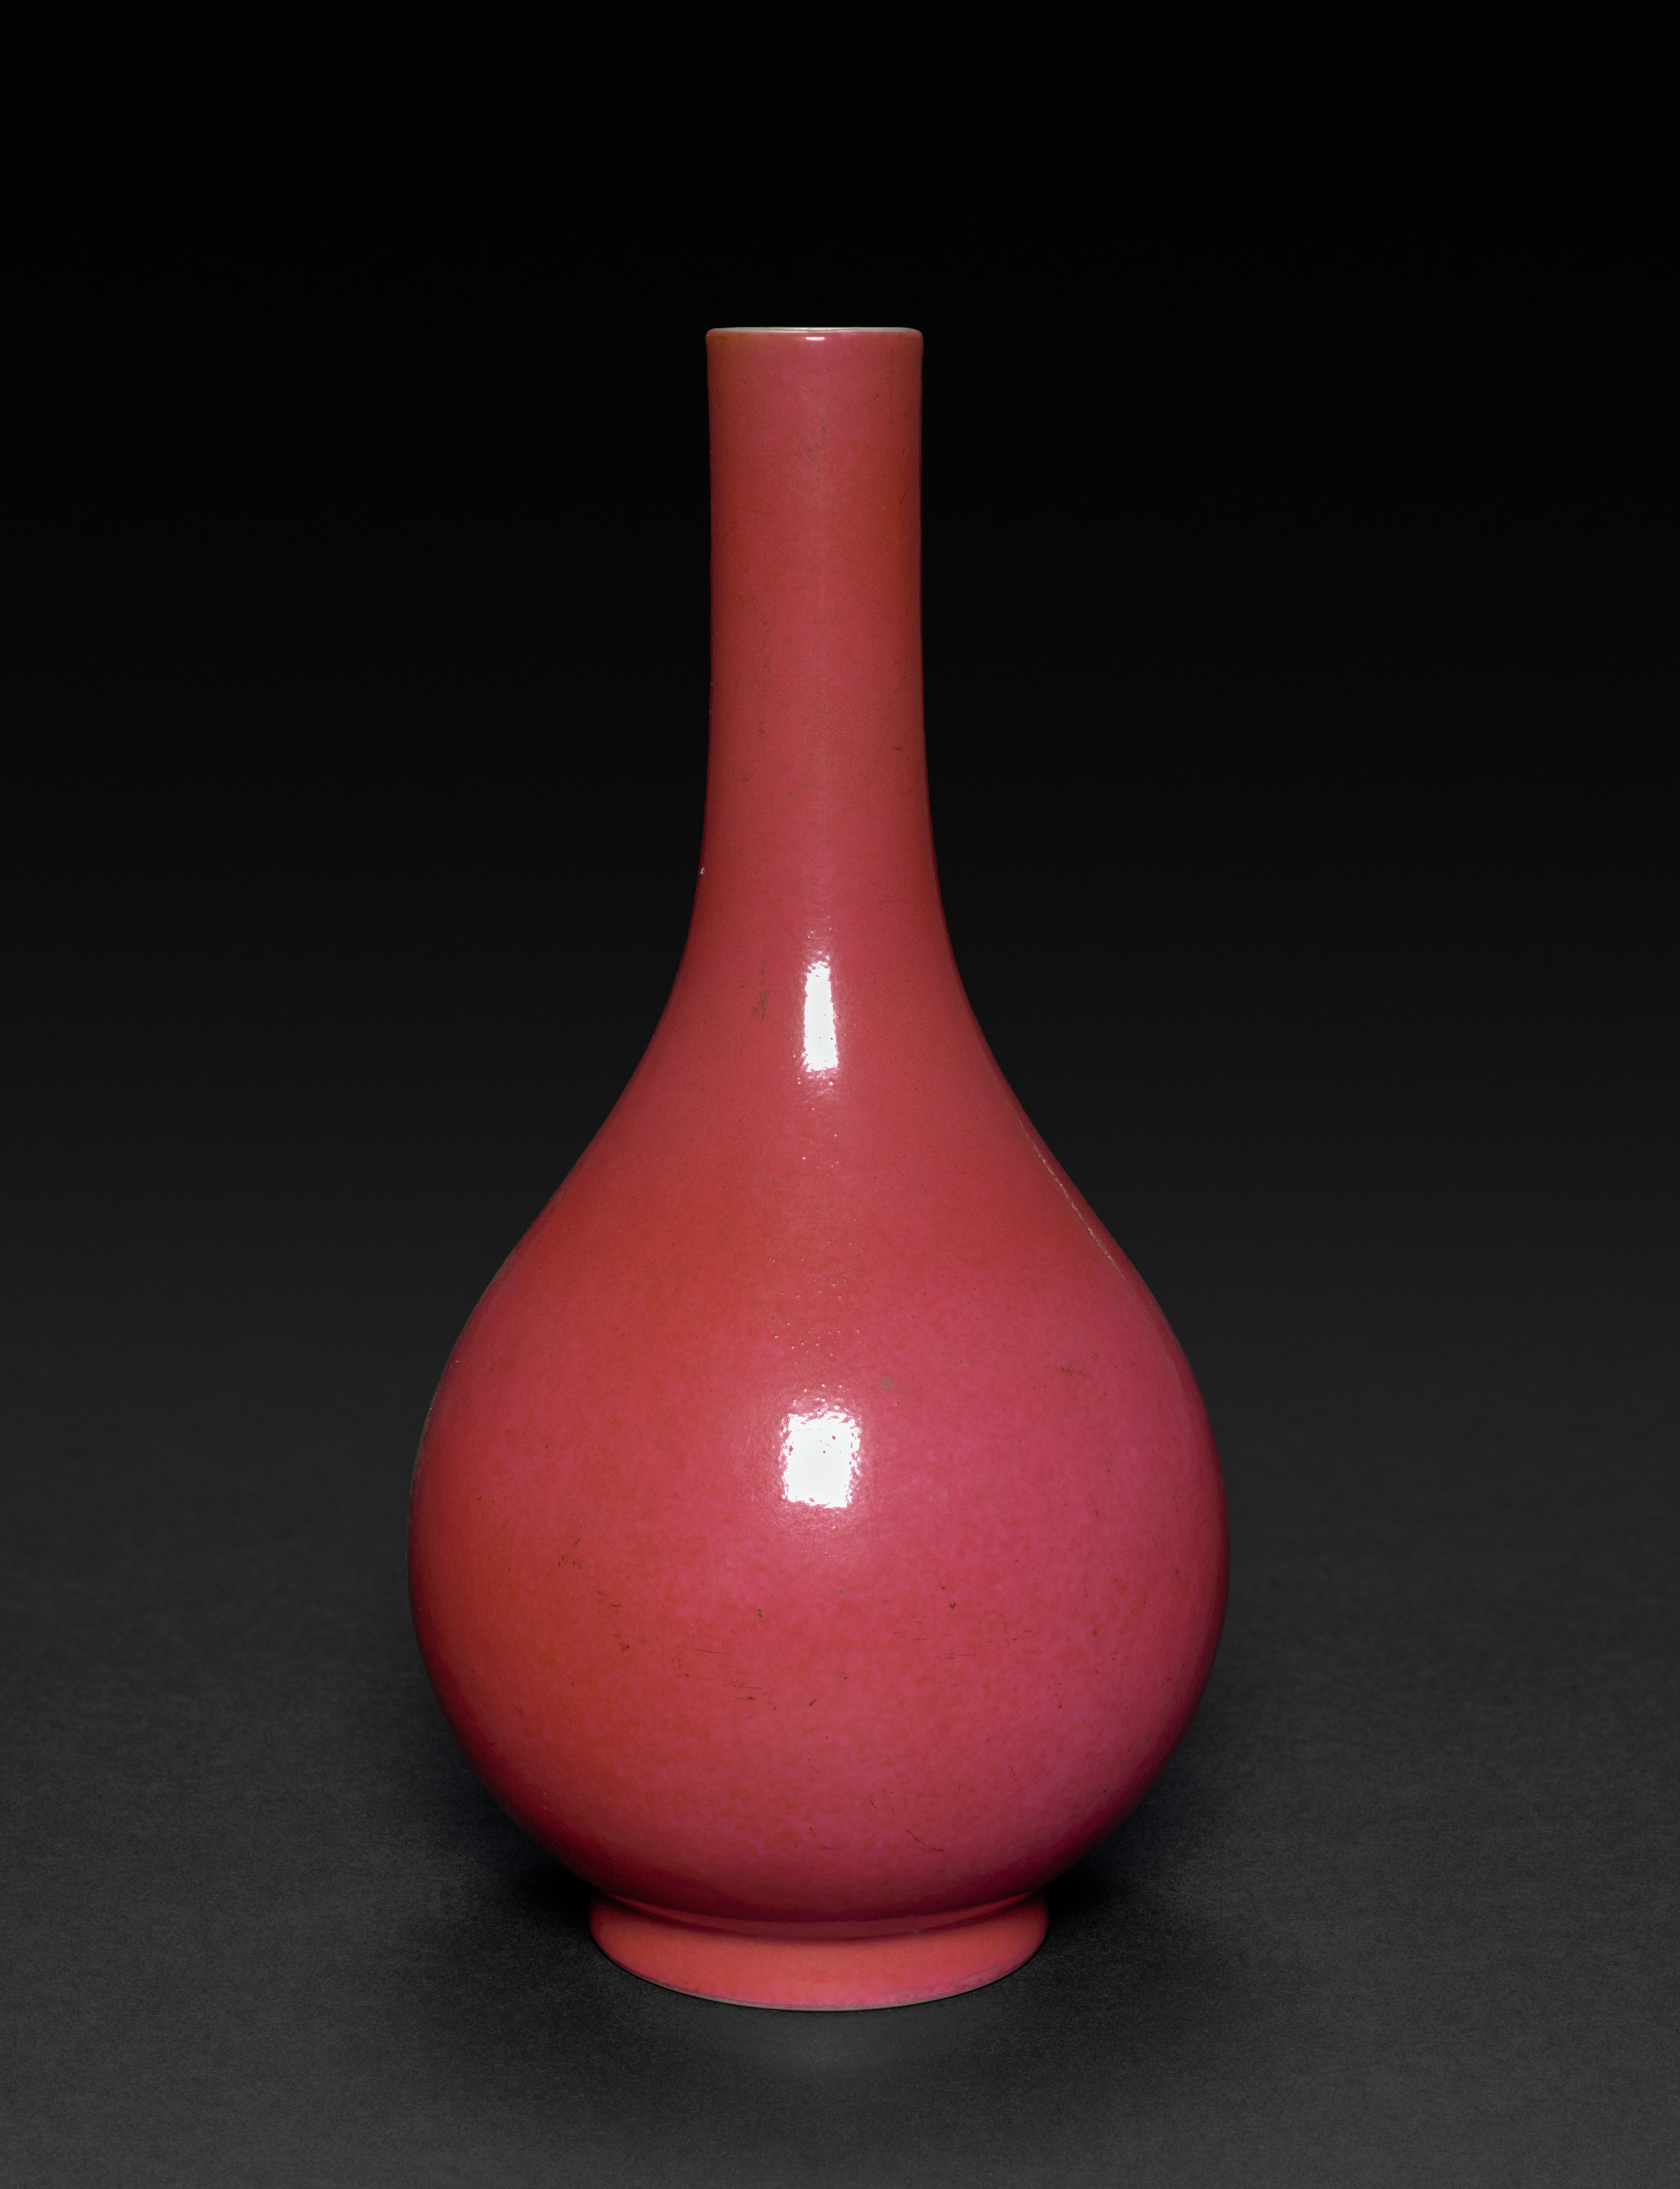 Vase with Pear-Shaped Body